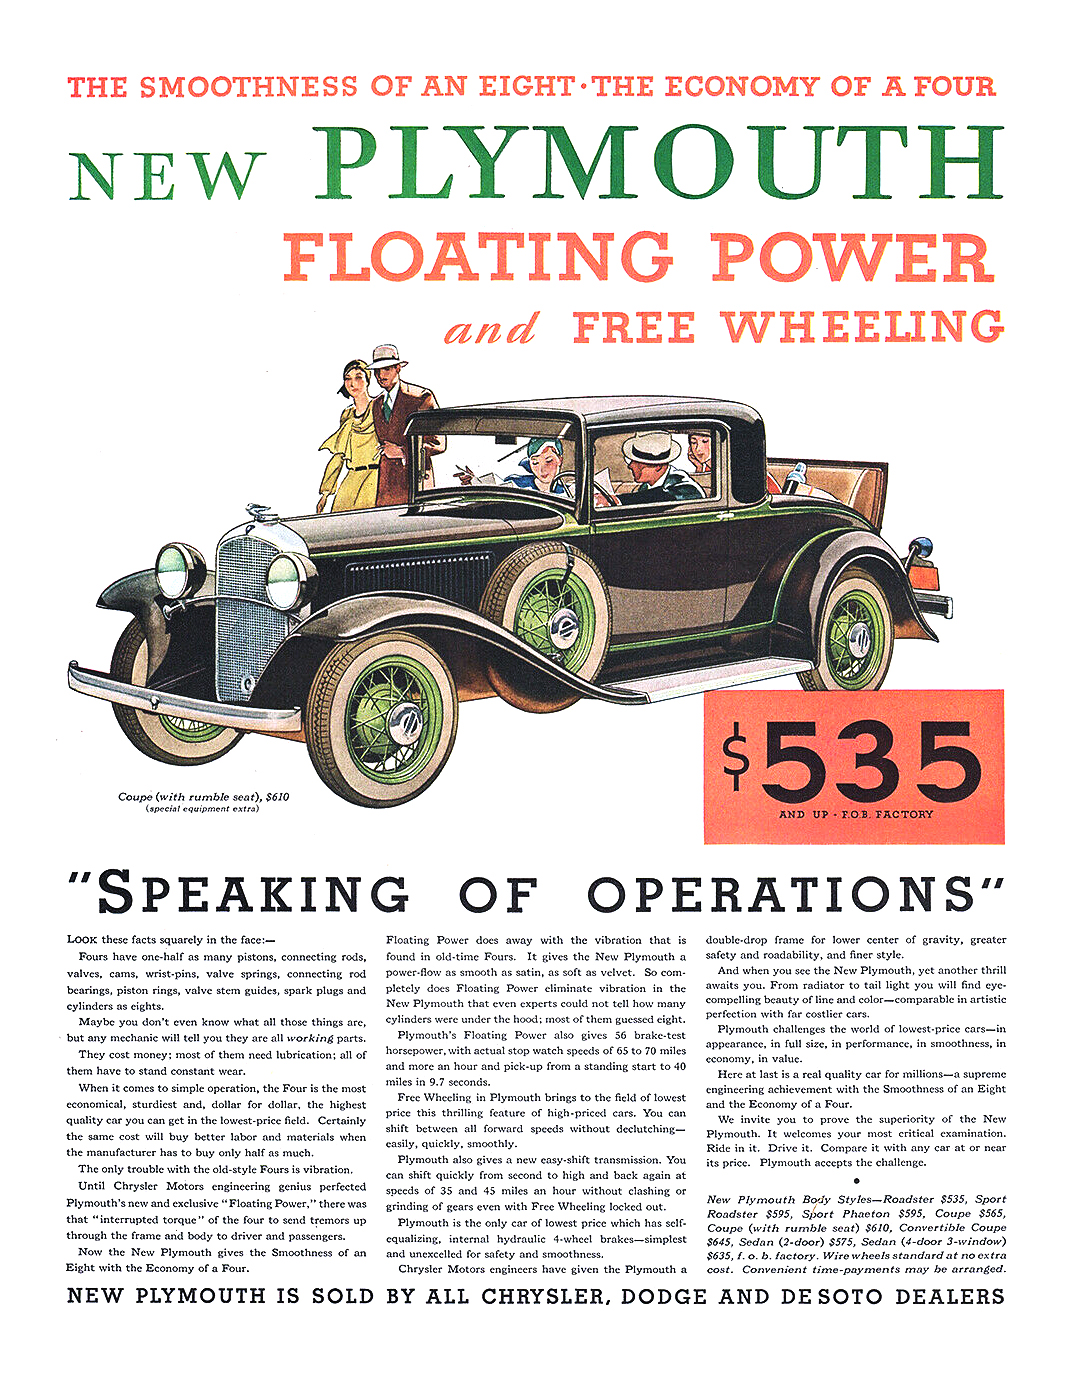 Plymouth Coupe with Rumble Seat Ad (August–September, 1931) – "Speaking of operations"